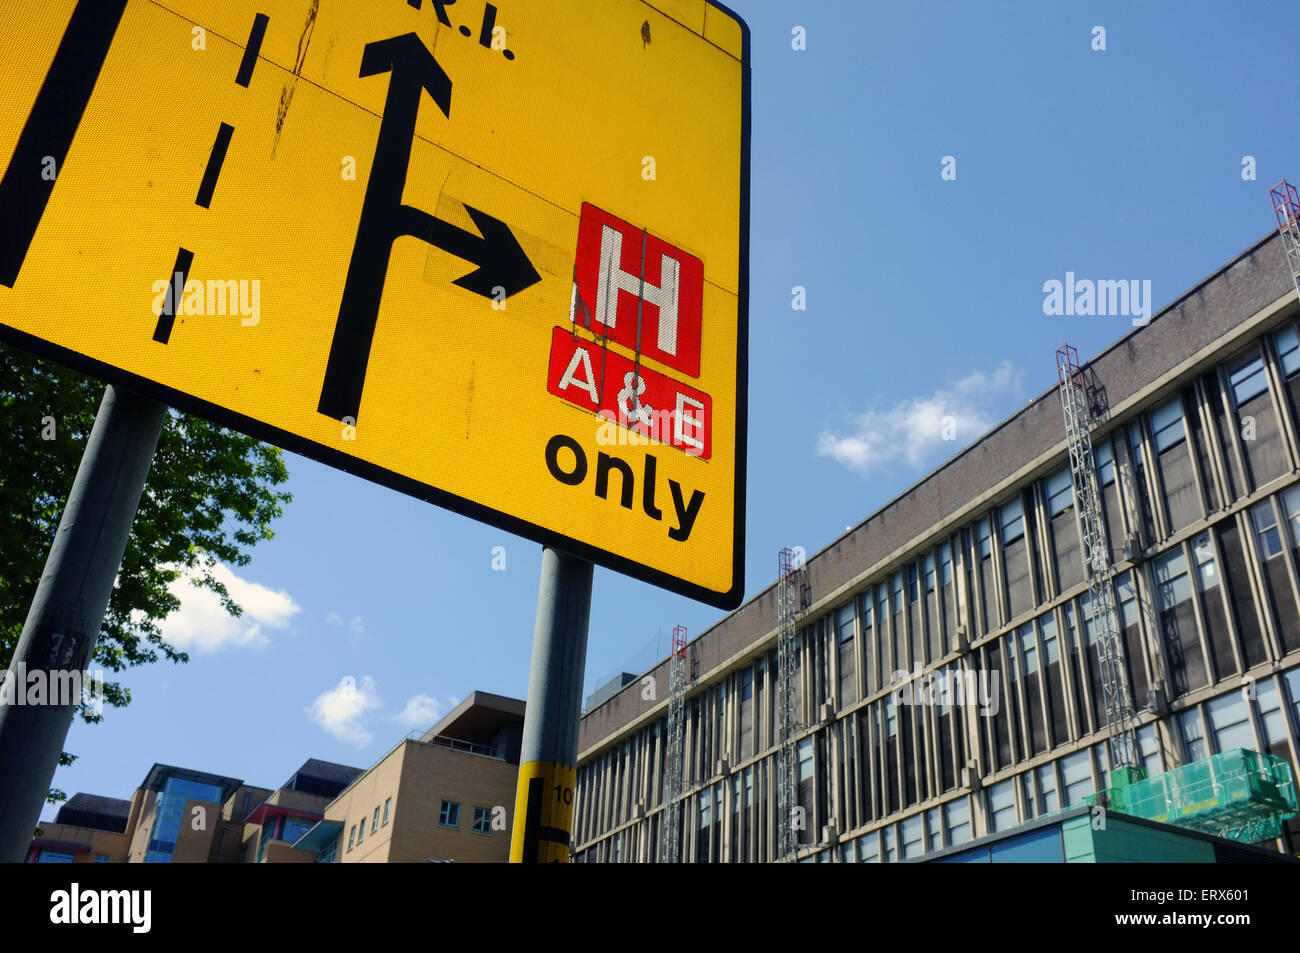 A Hospital A&E road sign in Bristol. Stock Photo